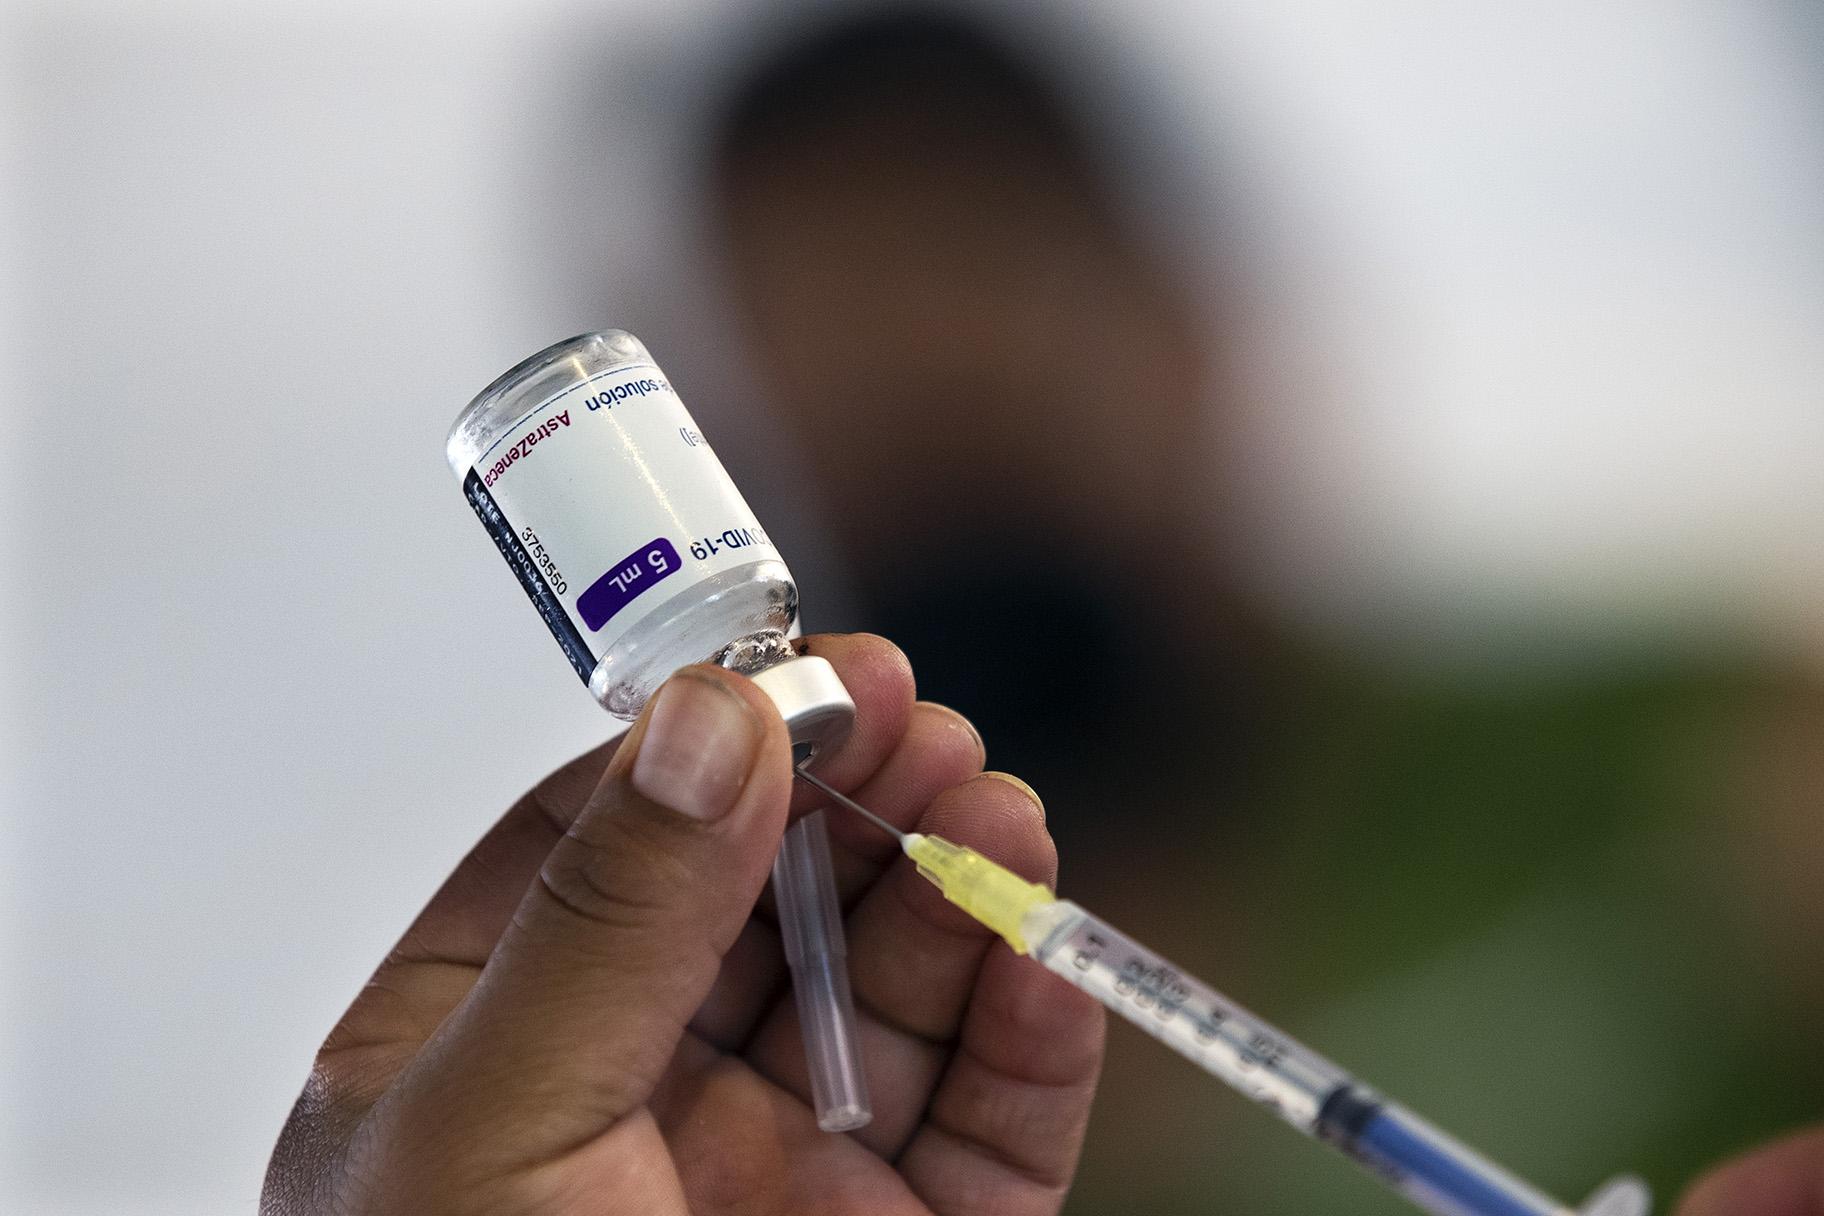 A health worker prepares to administer a jab of the AstraZeneca COVID-19 vaccine during a vaccination drive for people ages 30 to 39 in Mexico City, Wednesday, July 7, 2021. (AP Photo / Marco Ugarte)